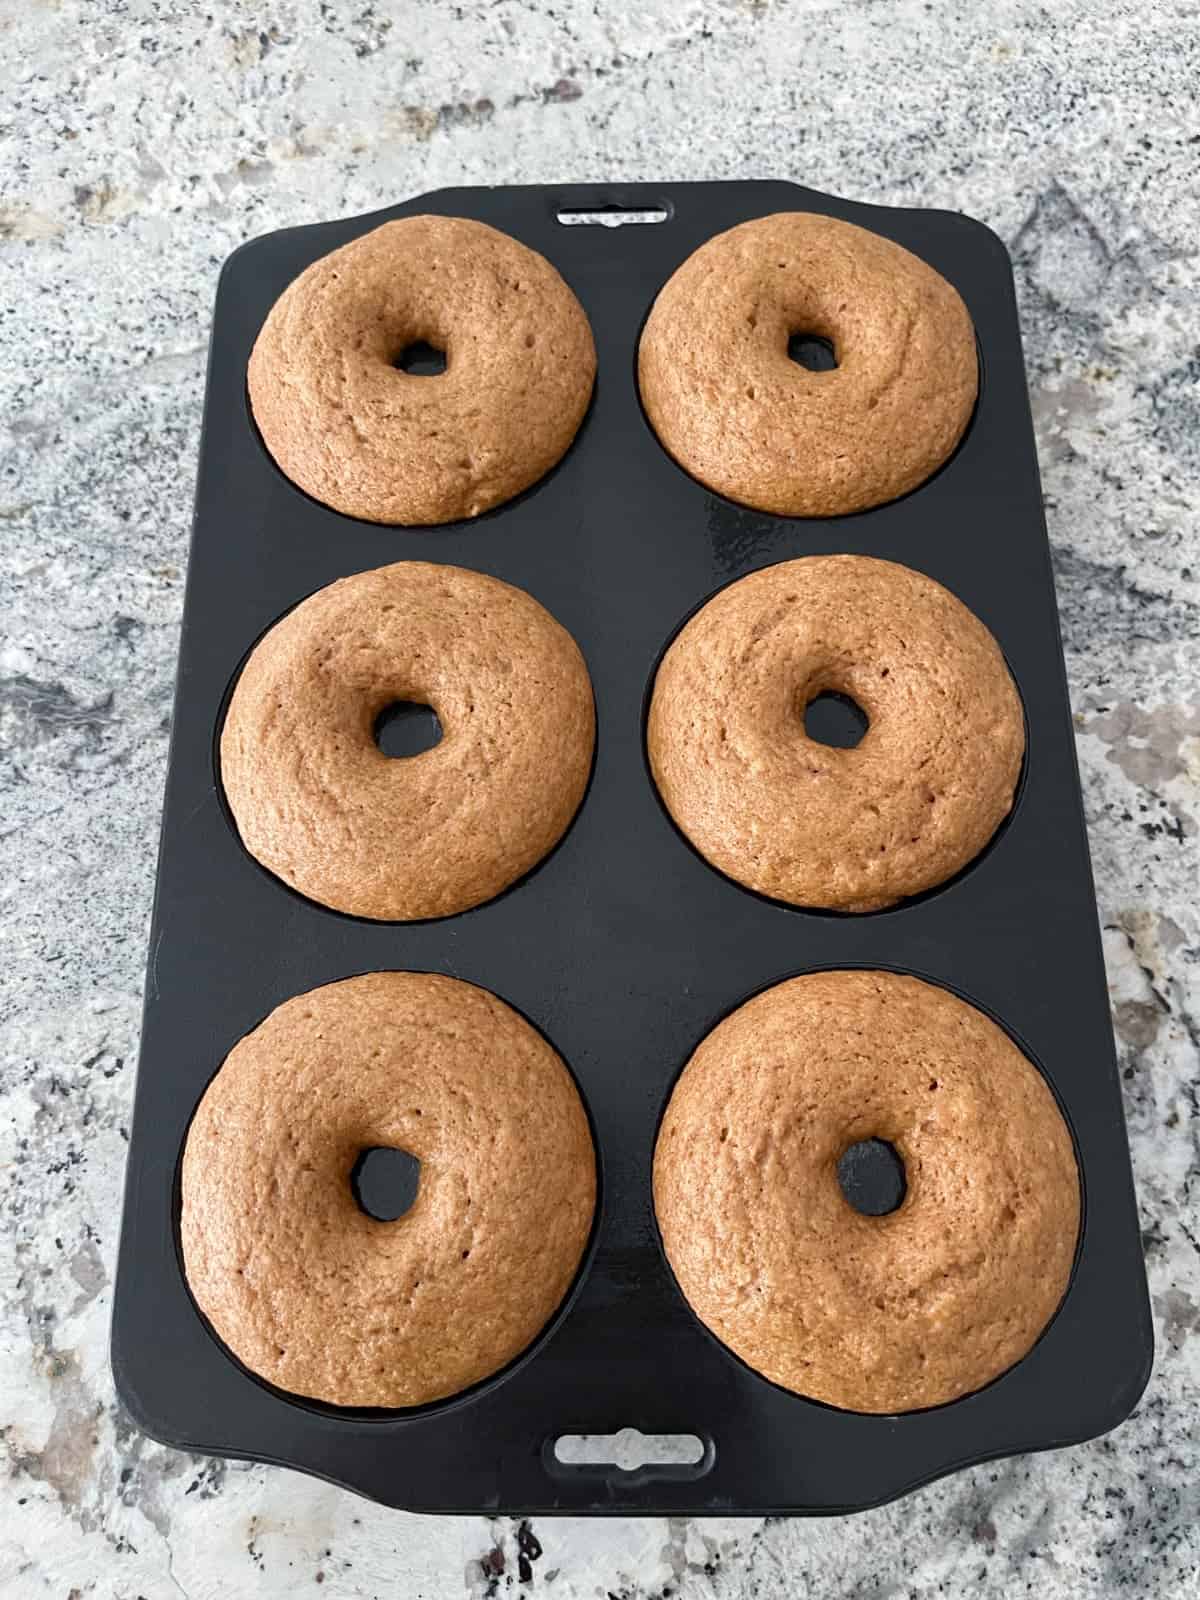 Fresh baked whole wheat donuts cooling in pan on granite counter.